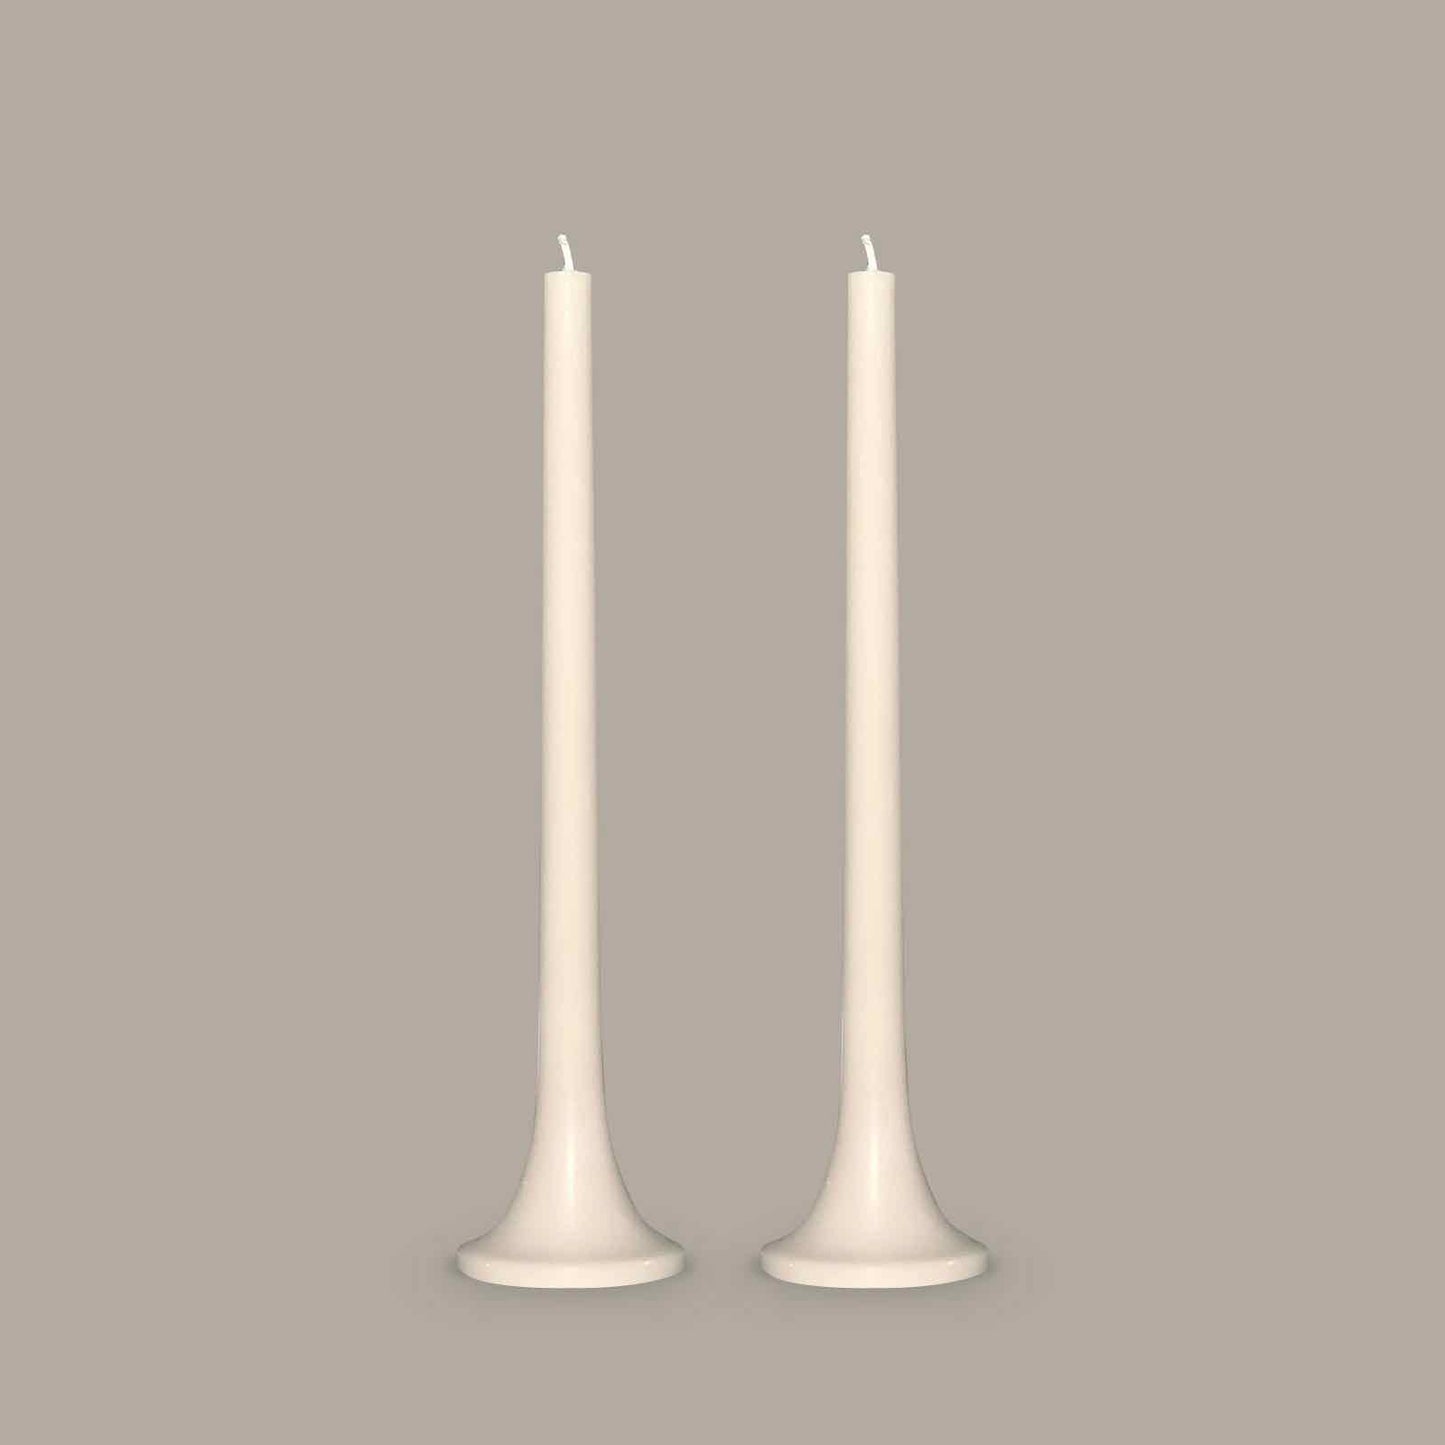 Taper candles in neutral stone